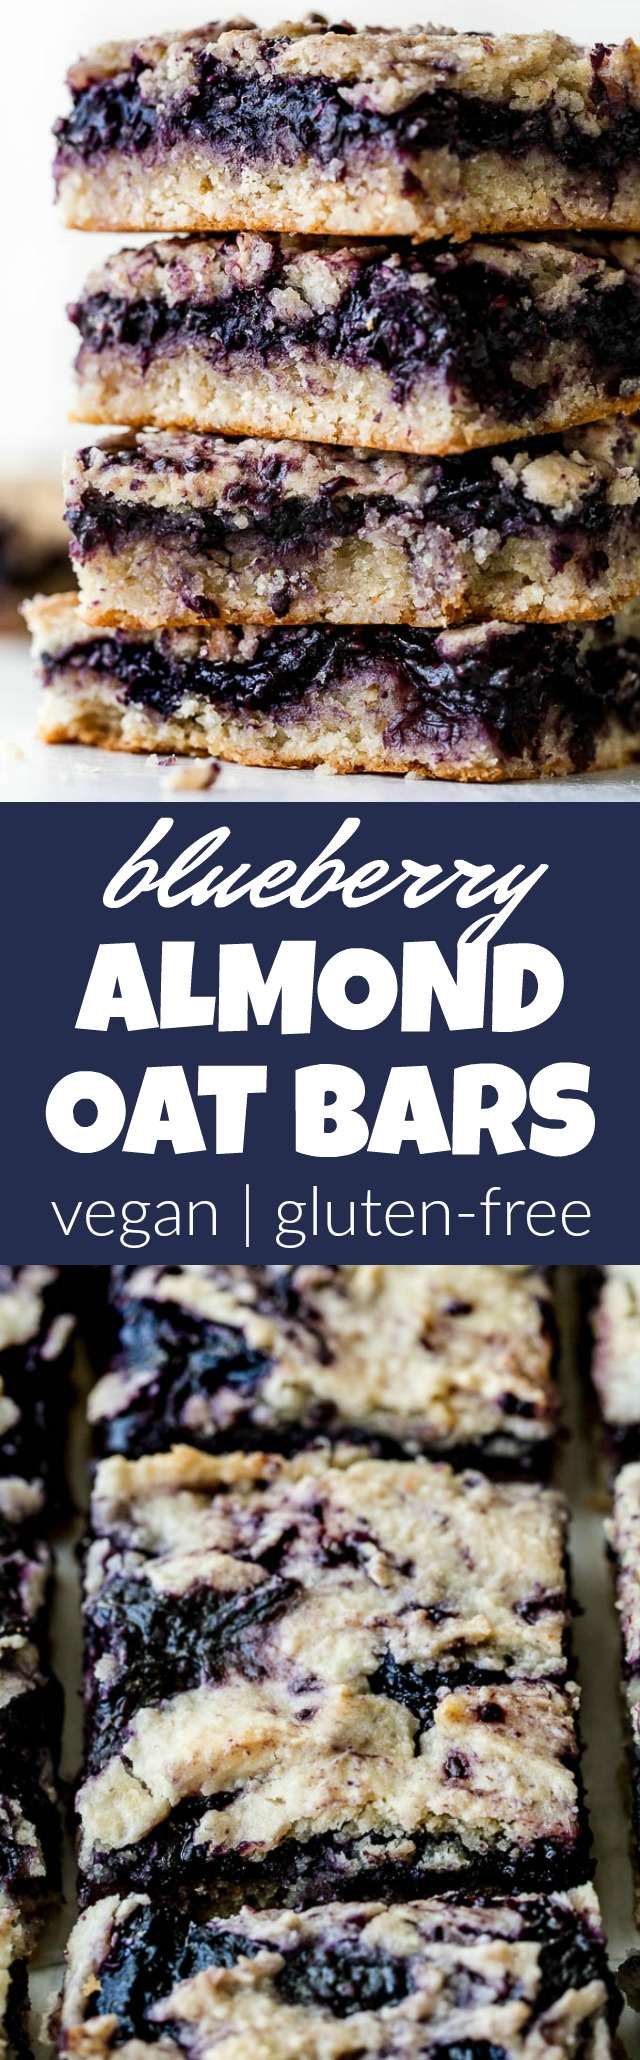 Blueberry Almond Oat Bars that are so tender and "buttery" you'd never guess they're made without any flour or butter! | runningwithspoons.com #glutenfree #vegan #recipe #snack #healthy